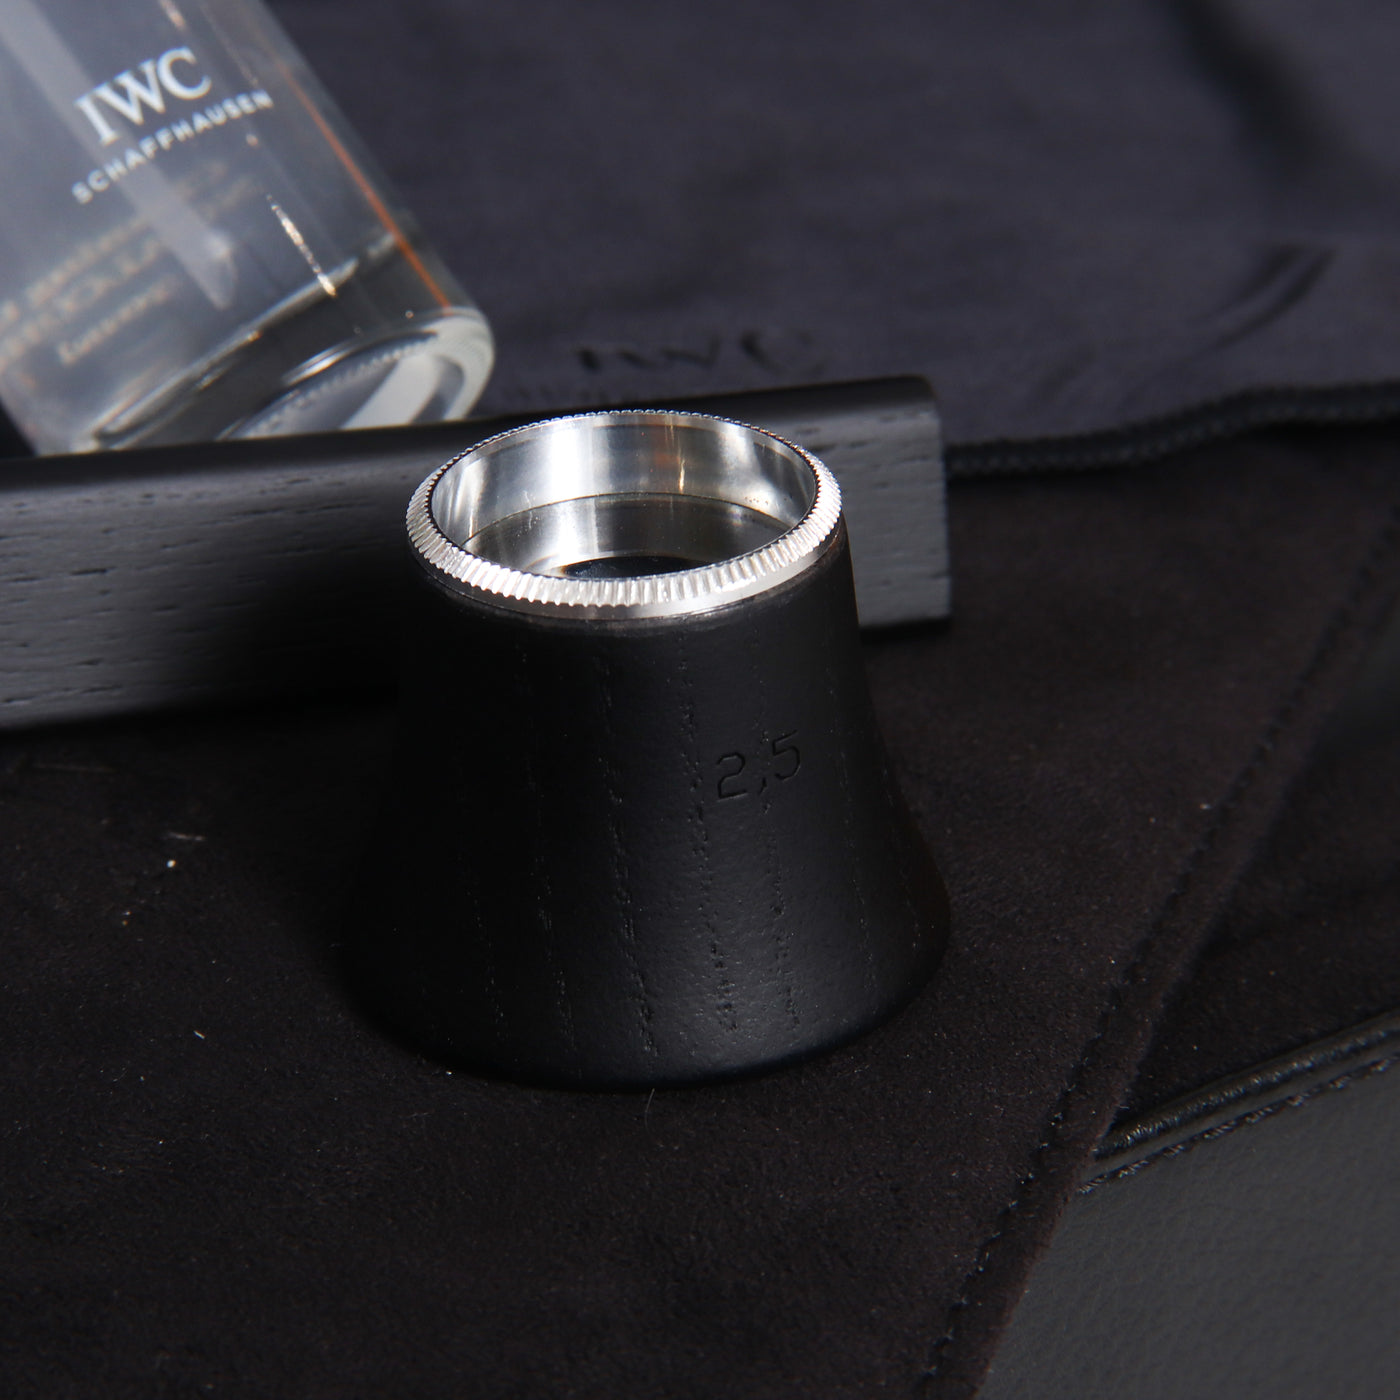 IWC Watch Tool & Cleaning Kit Close Up